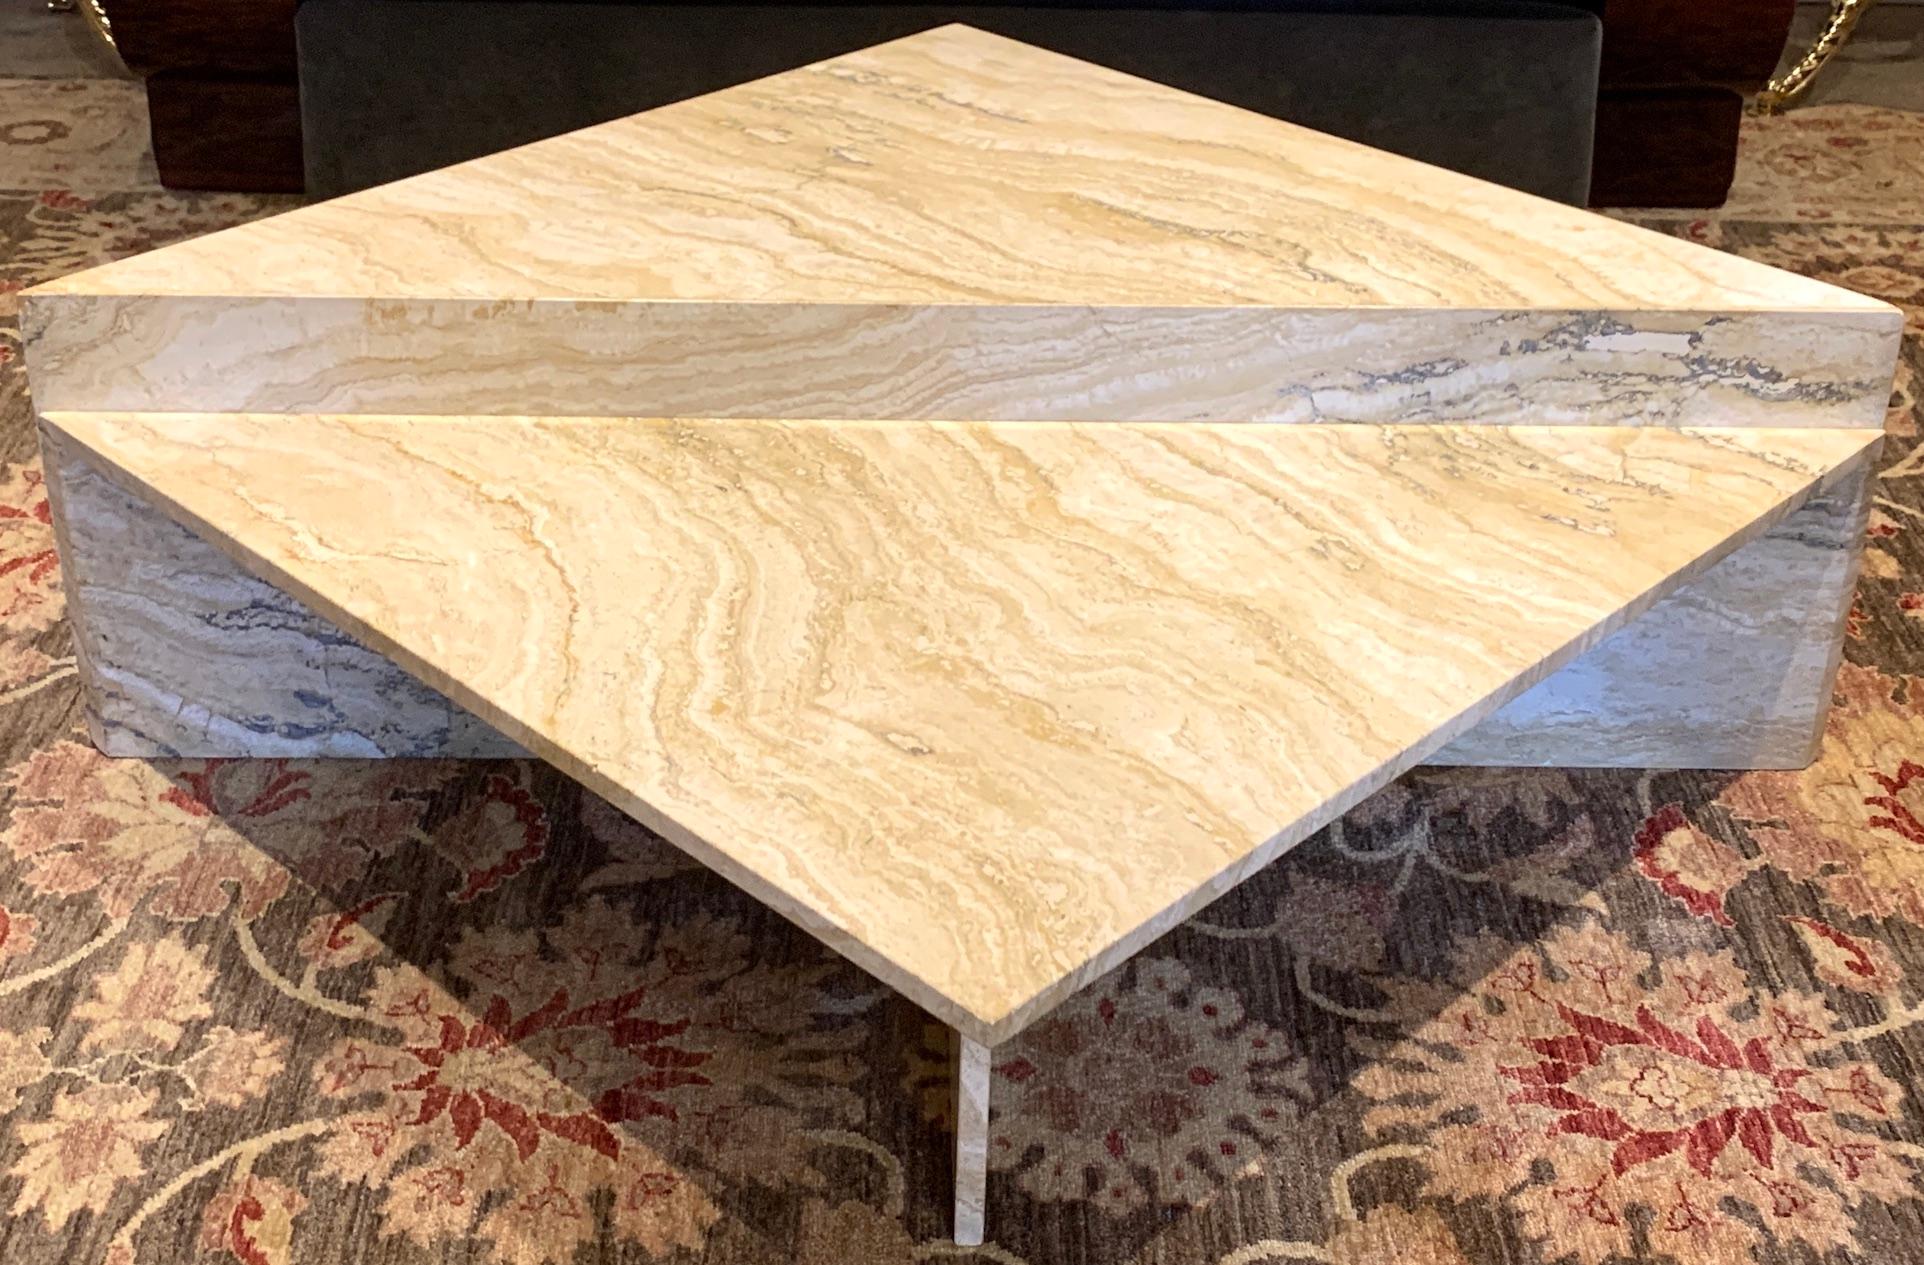 Italian variegated travertine two-tier coffee table, circa 1970s.
A tour de force in design and geometry. With two stunning specimen quality matched travertine sections, the taller piece measures 55